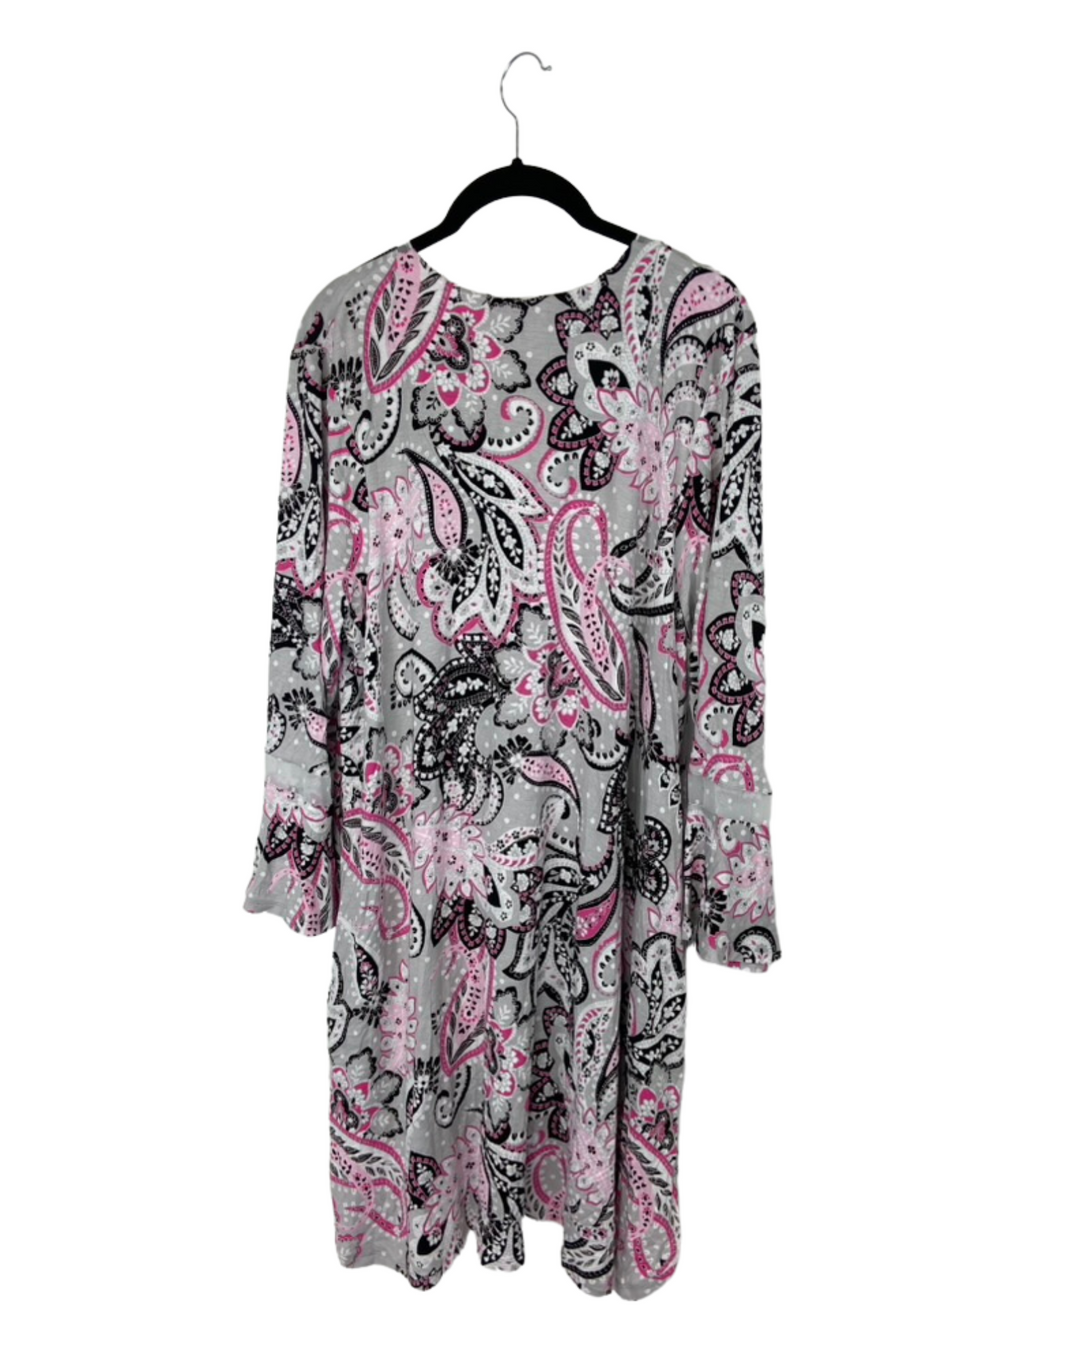 Pink Floral Nightgown - 1X